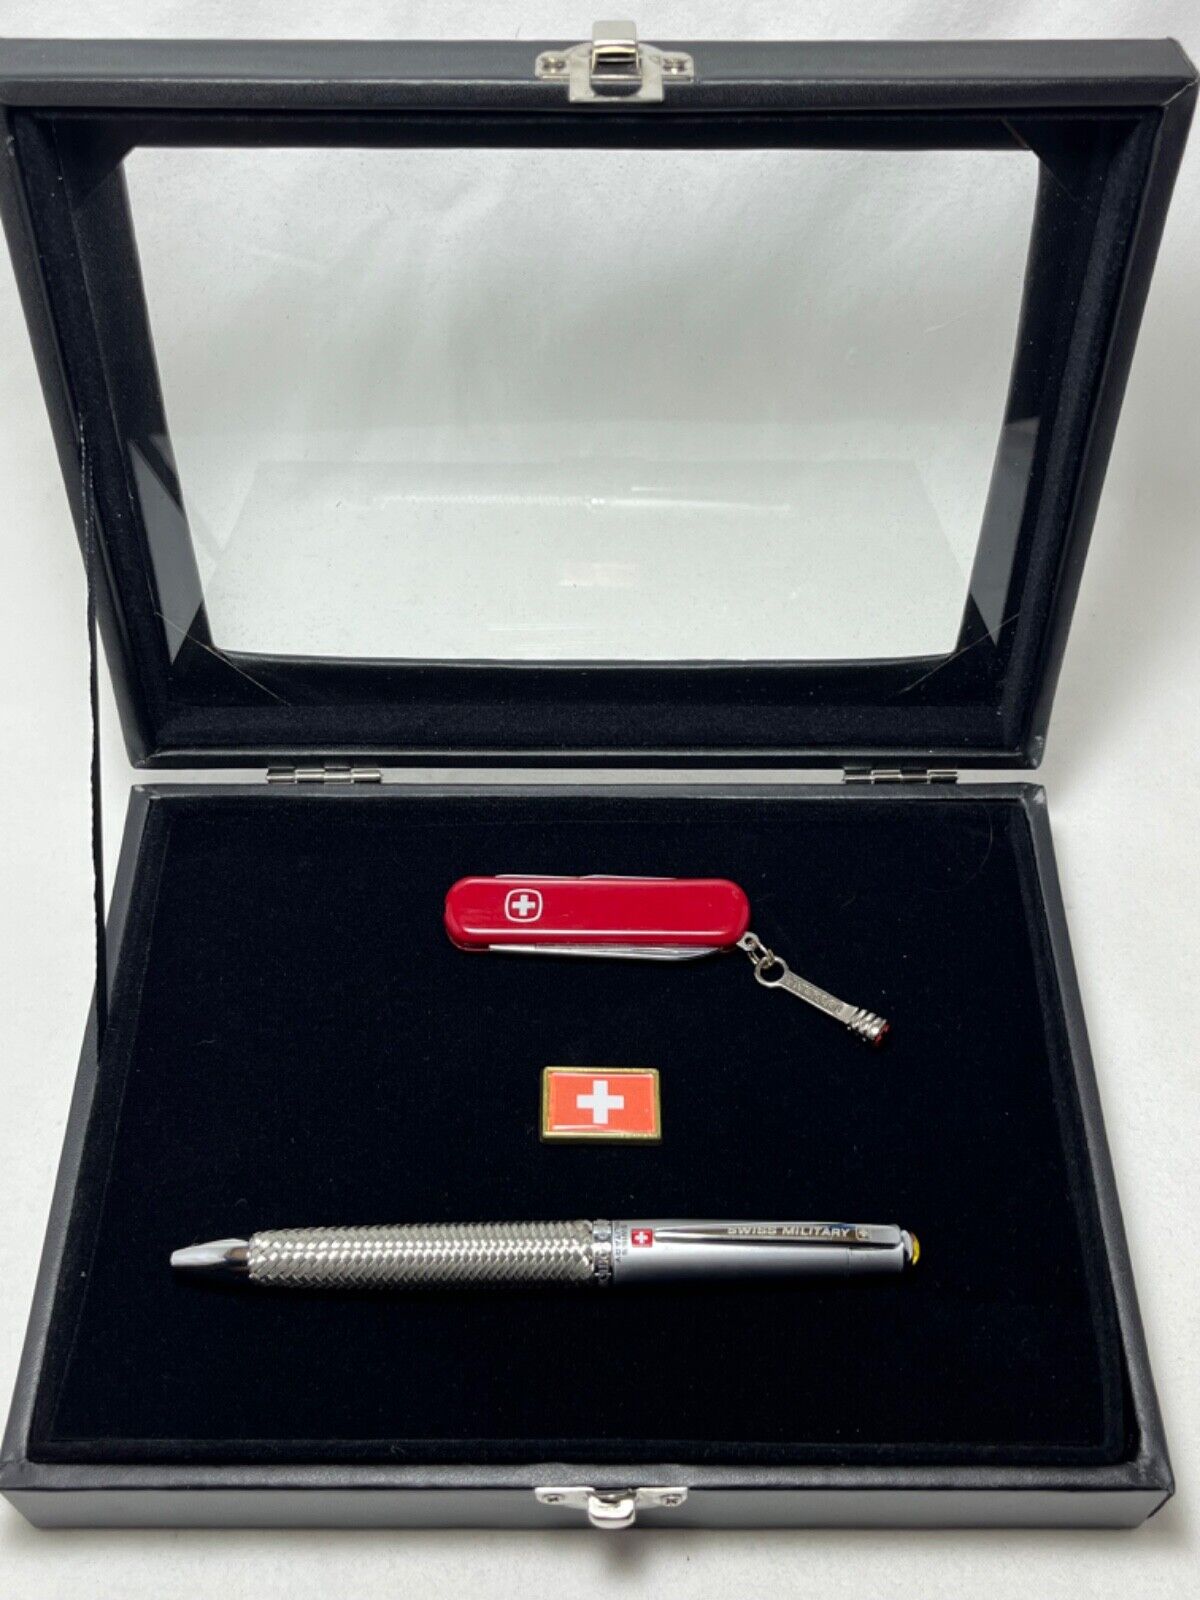 Wenger Esquire 65mm Delmont + Swiss Military Ltd Ed Pen + Leather Holders + Box